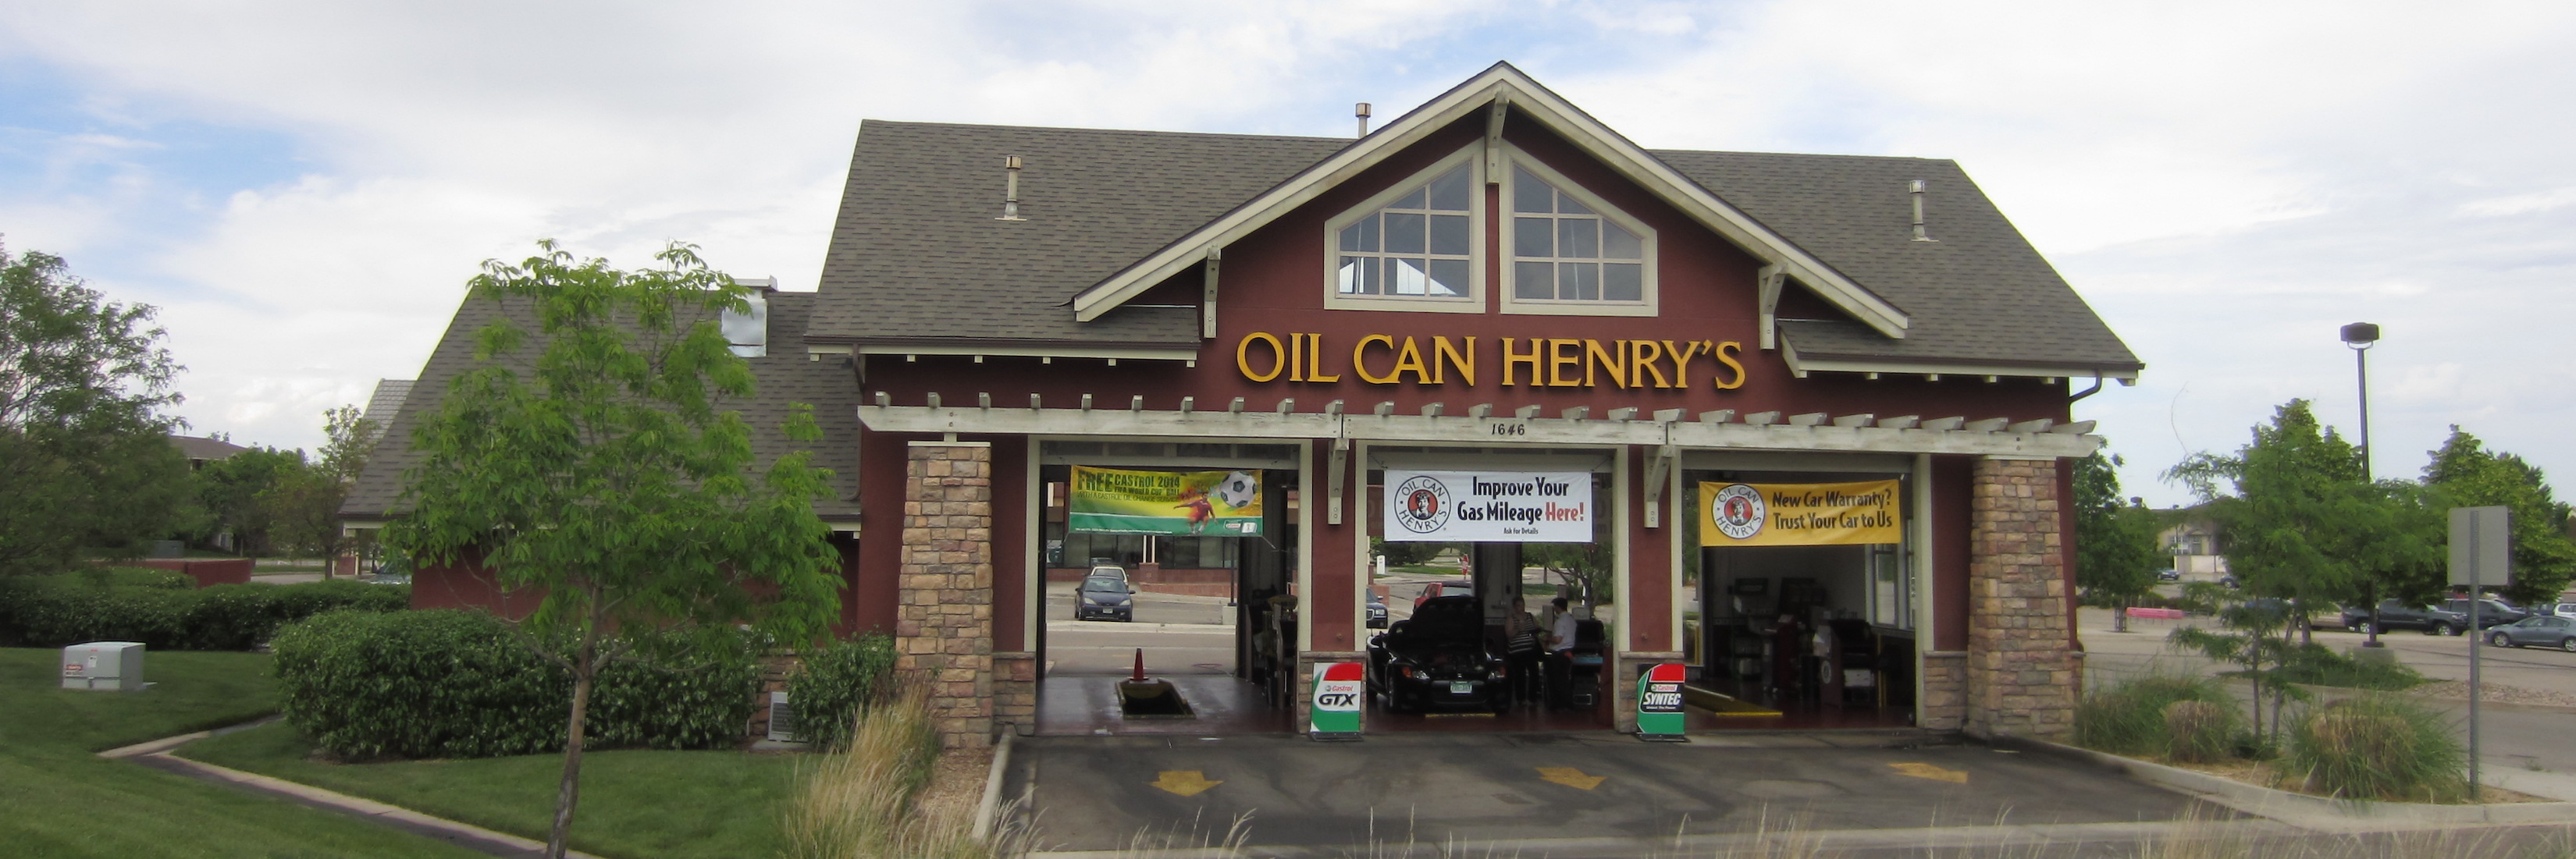 Oil Can Henry's - Longmont, Colorado